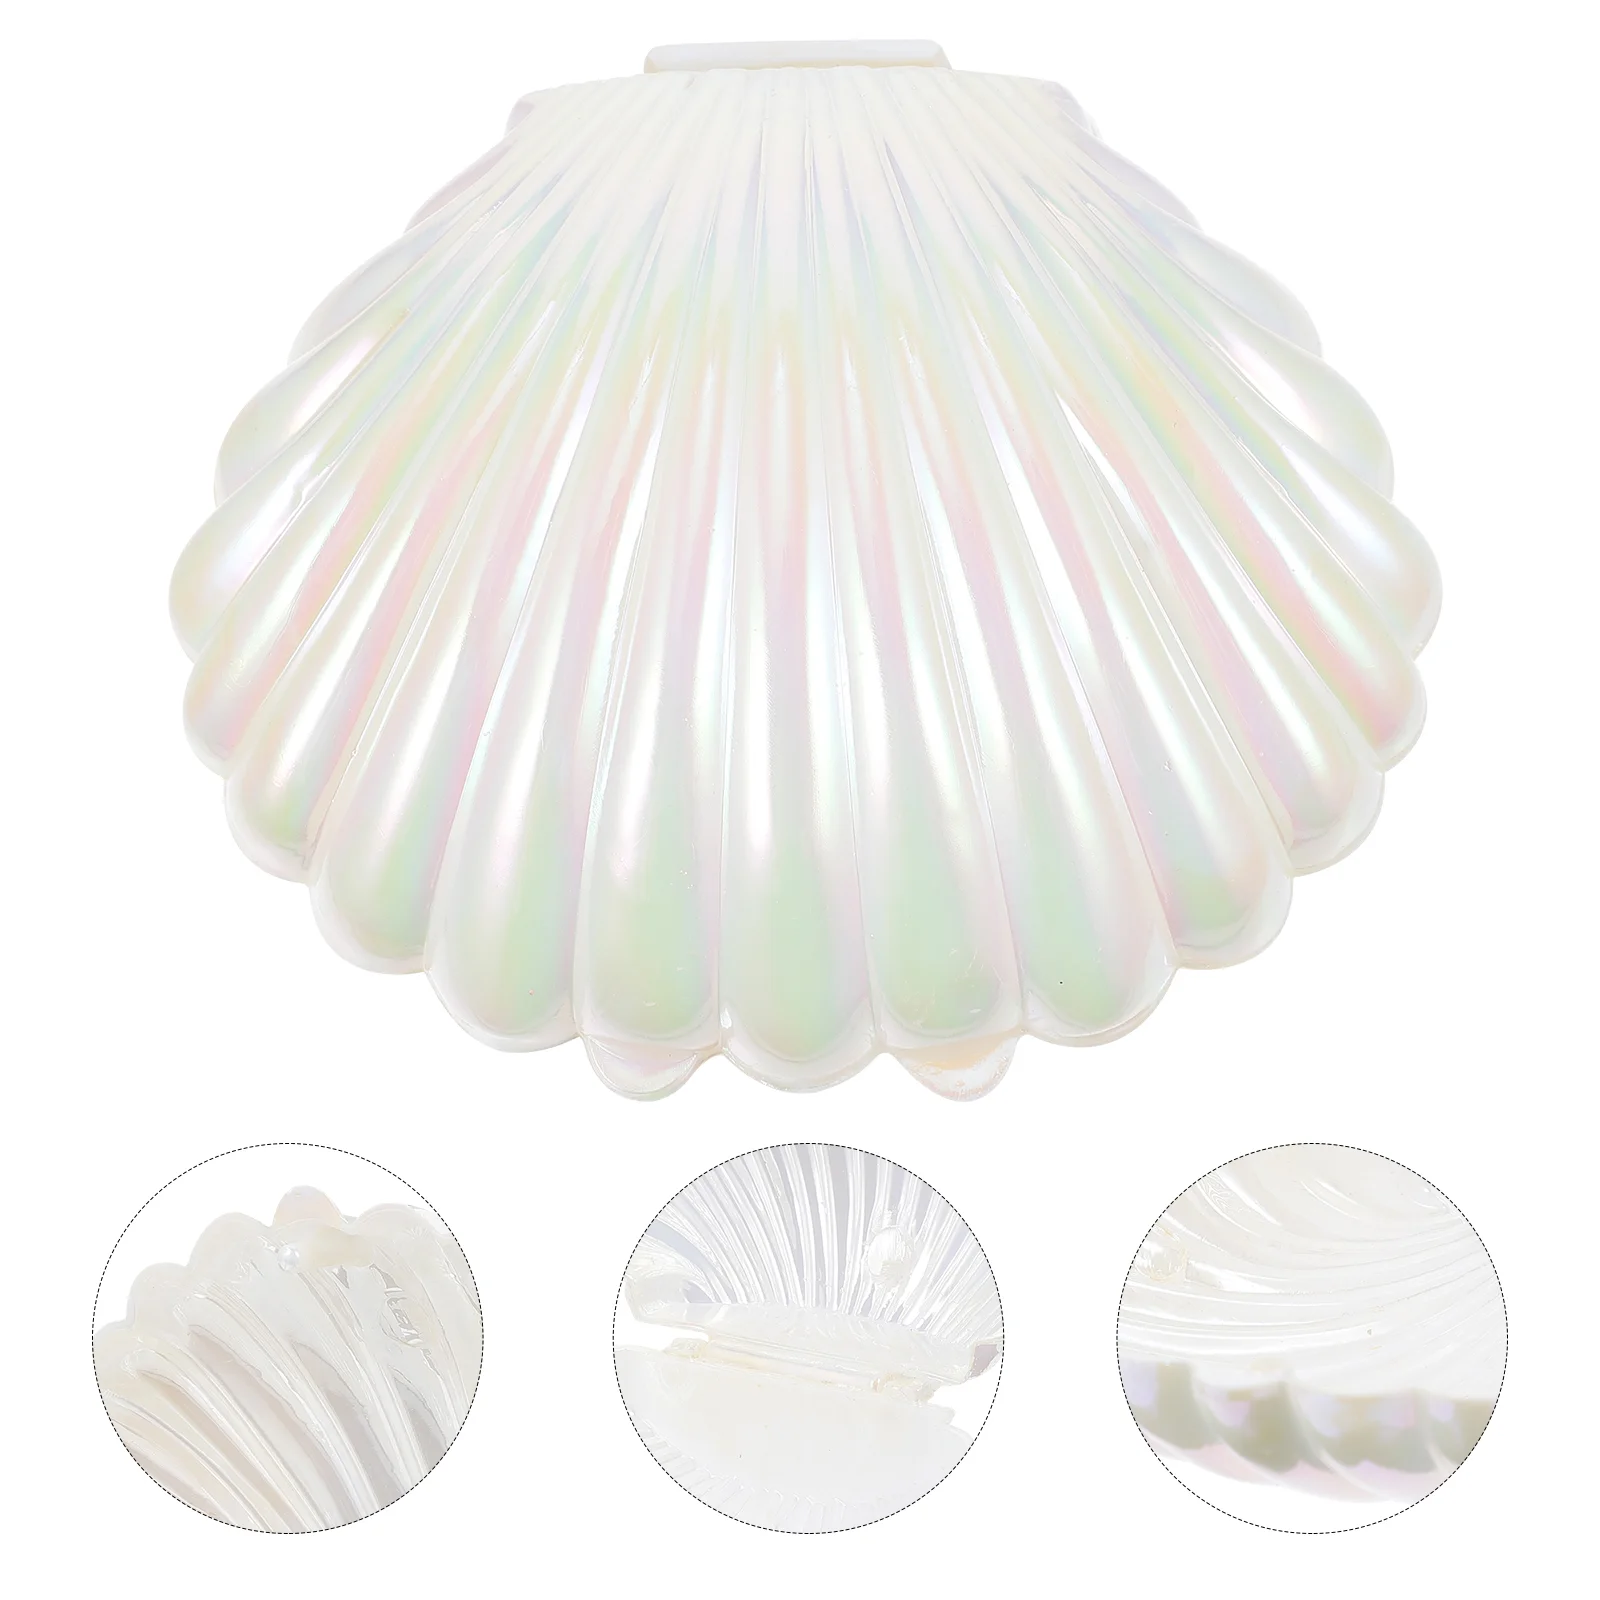 

Sea Shells Candy Boxes Seashell Containers Plastic Chocolate Box Creative Jewelry Holder Party Treat Boxes Wedding Birthday